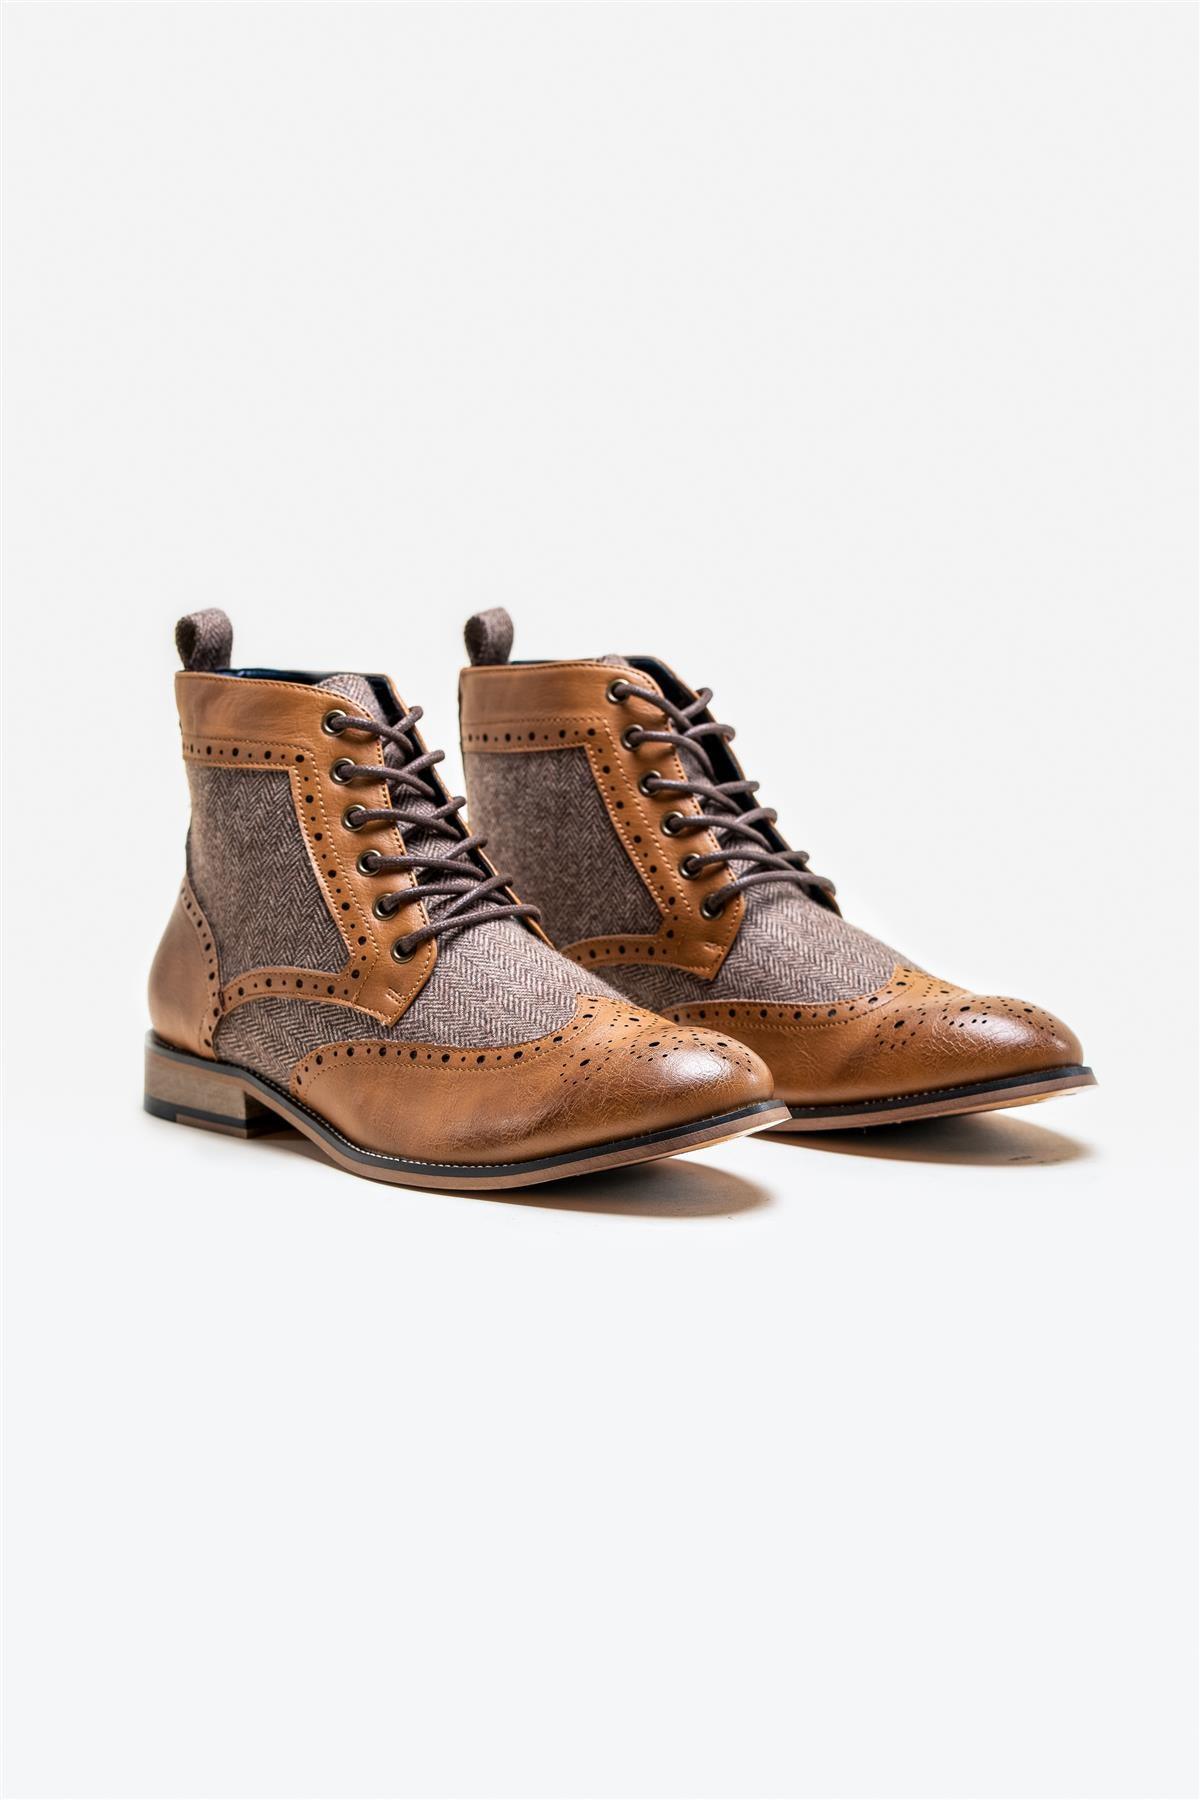 Sherlock tan lace up boot front